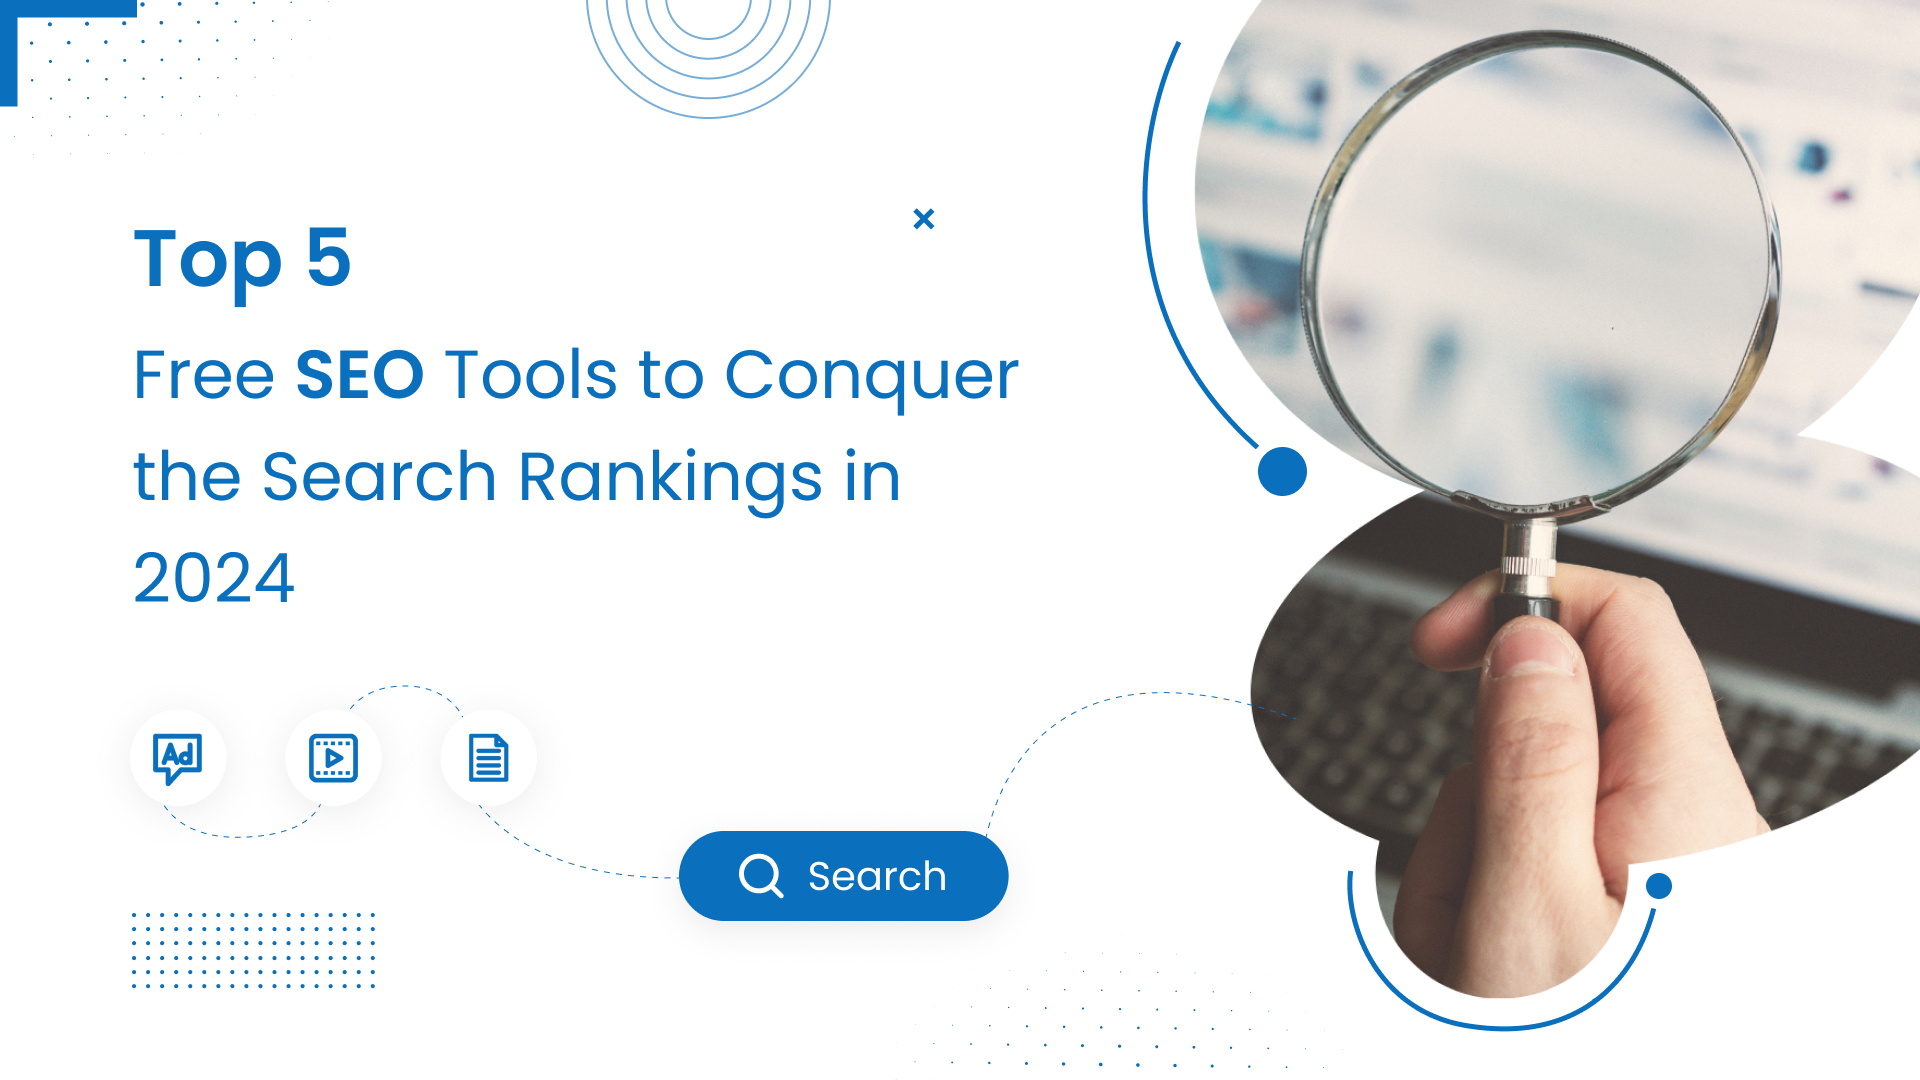 Top 5 Free SEO Tools to Conquer the Search Rankings in 2024